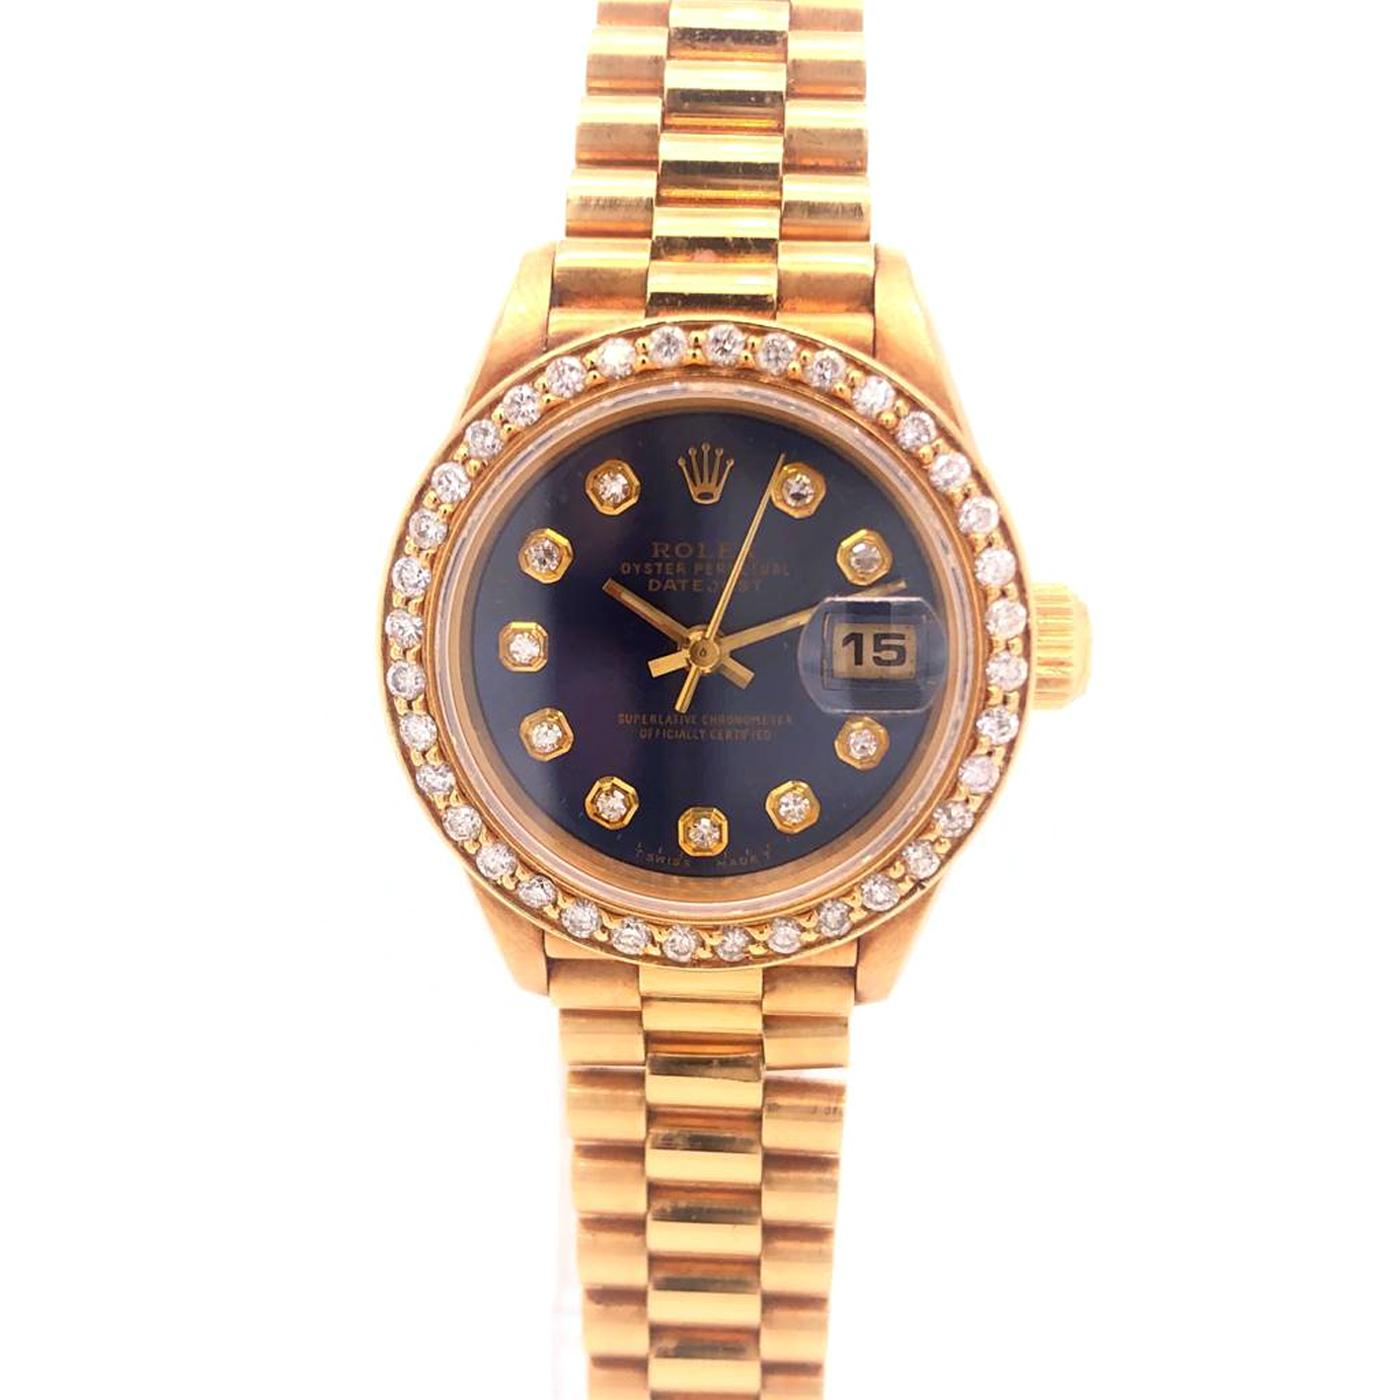 The yellow gold and diamond Rolex Lady-Datejust 69178 is a truly magnificent timepiece. Yellow gold forged in-house adorns the 26mm Oyster case, President bracelet, and Fliplock clasp. Valuable and striking, the yellow gold finish will add serious